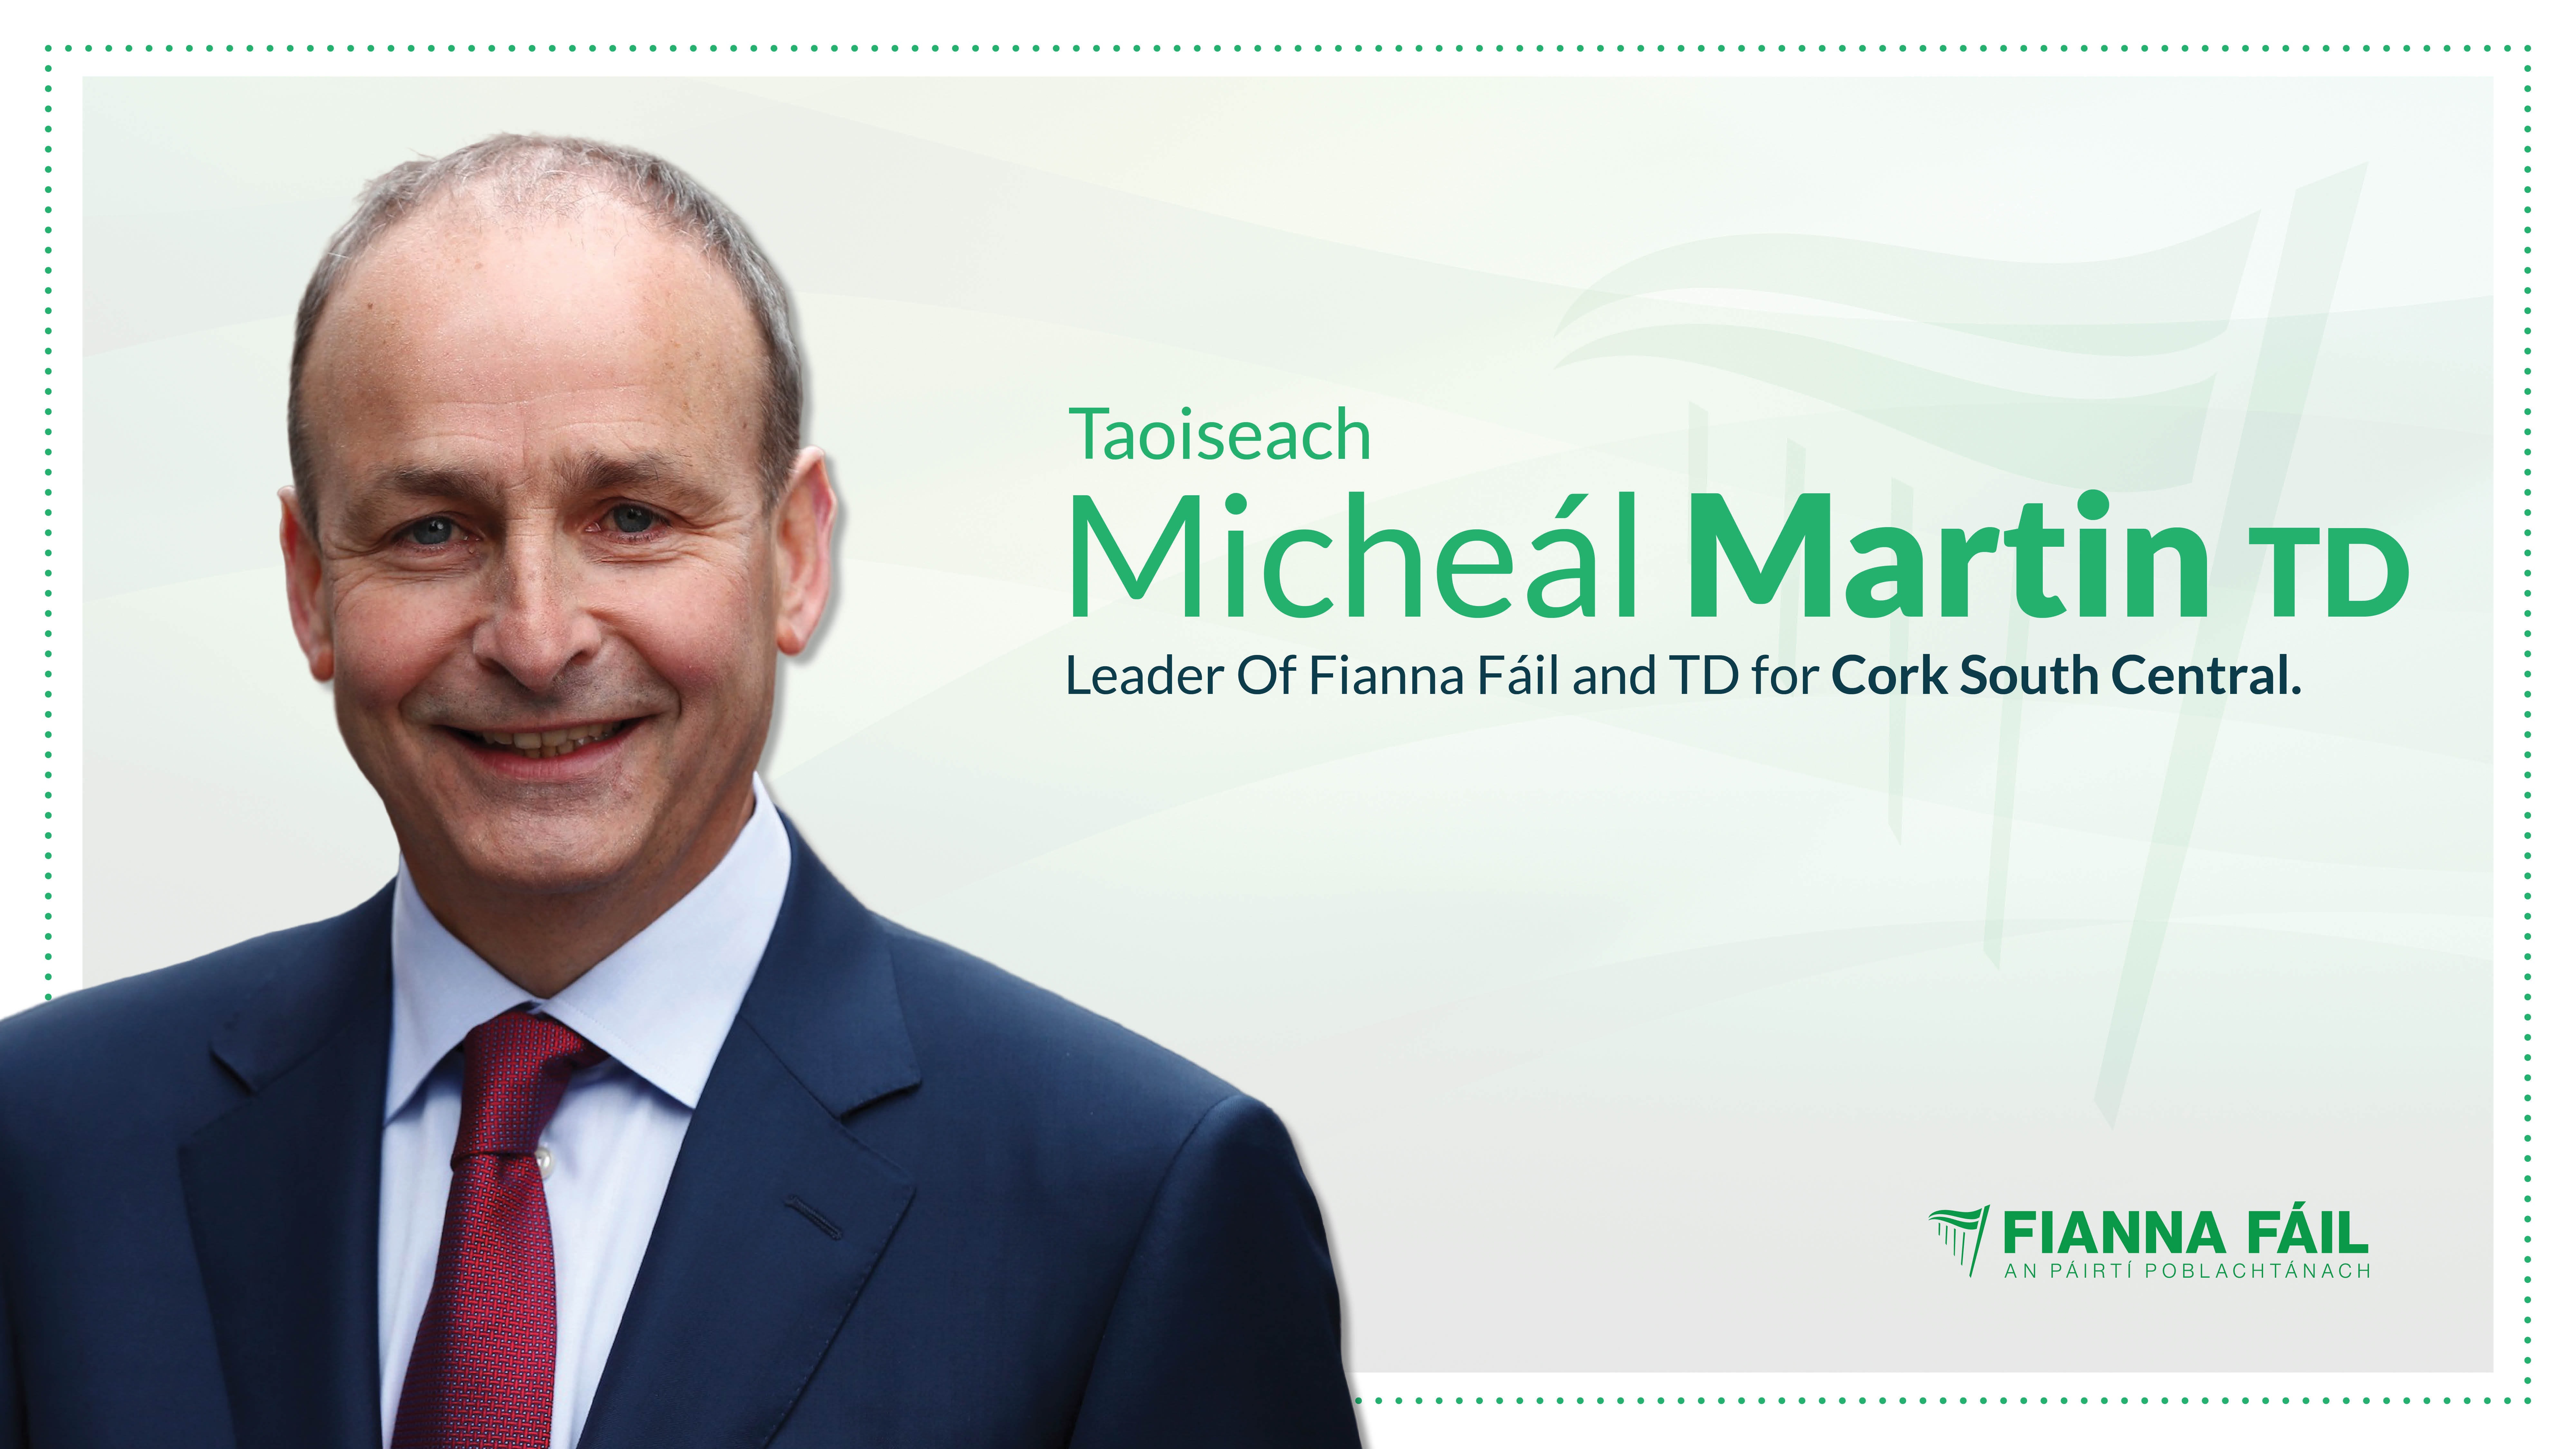 Statement from An Taoiseach Micheál Martin TD on National Day of Remembrance and Recognition